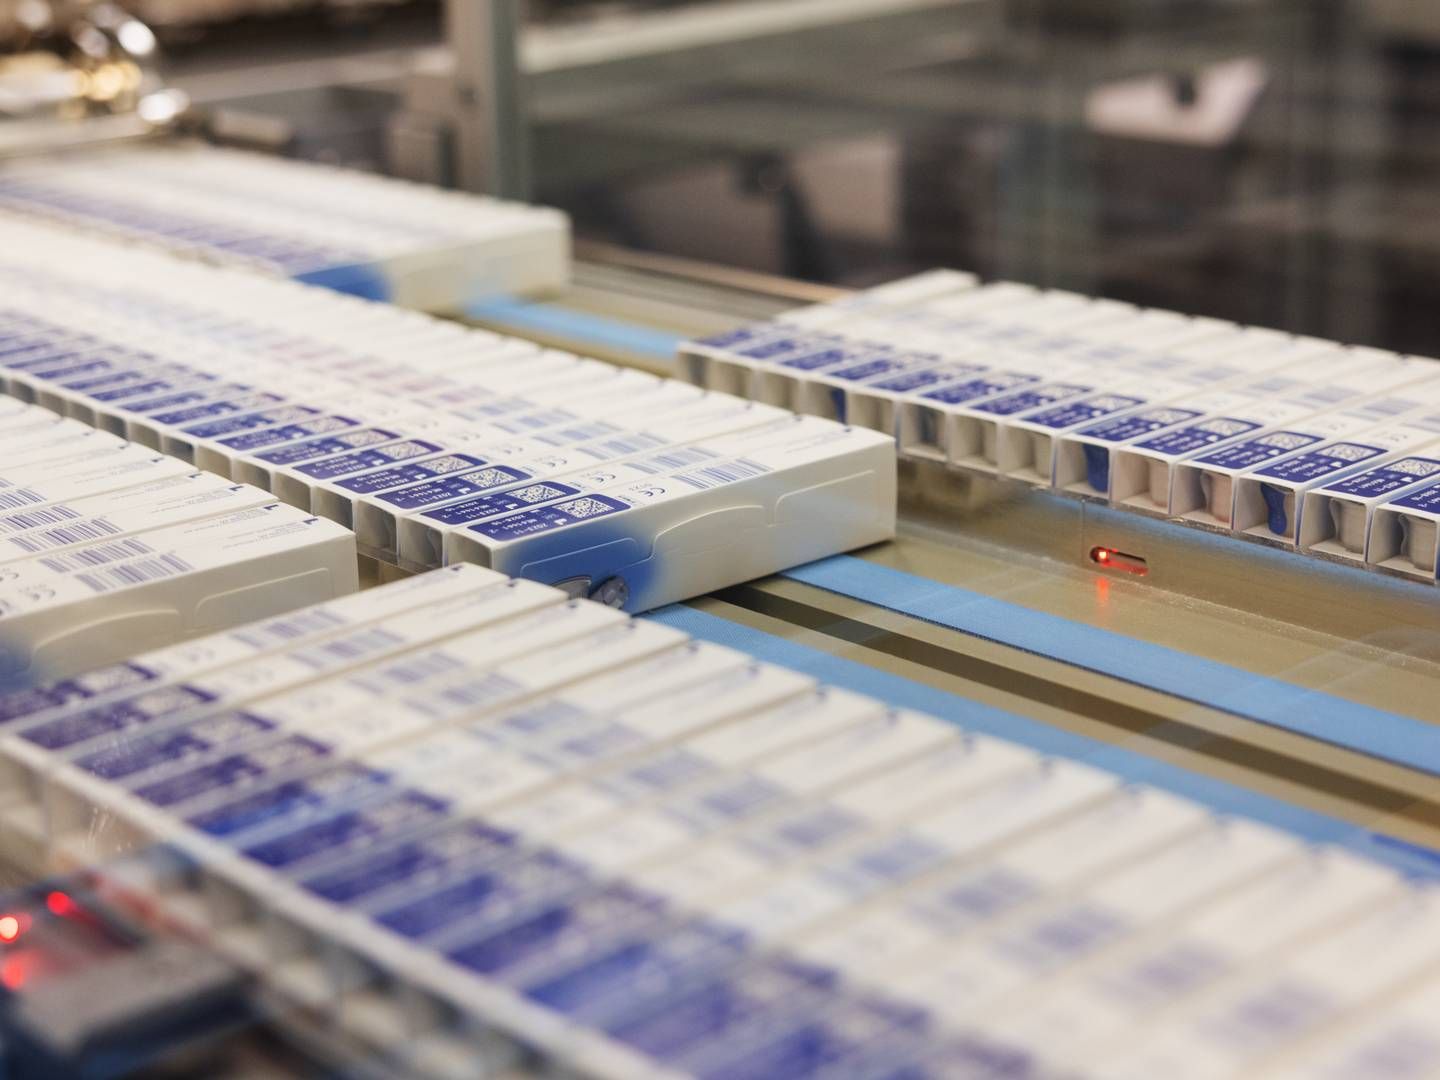 Novo Nordisk does not have enough capacity to meet the demand for its products. | Foto: Gregers Tycho